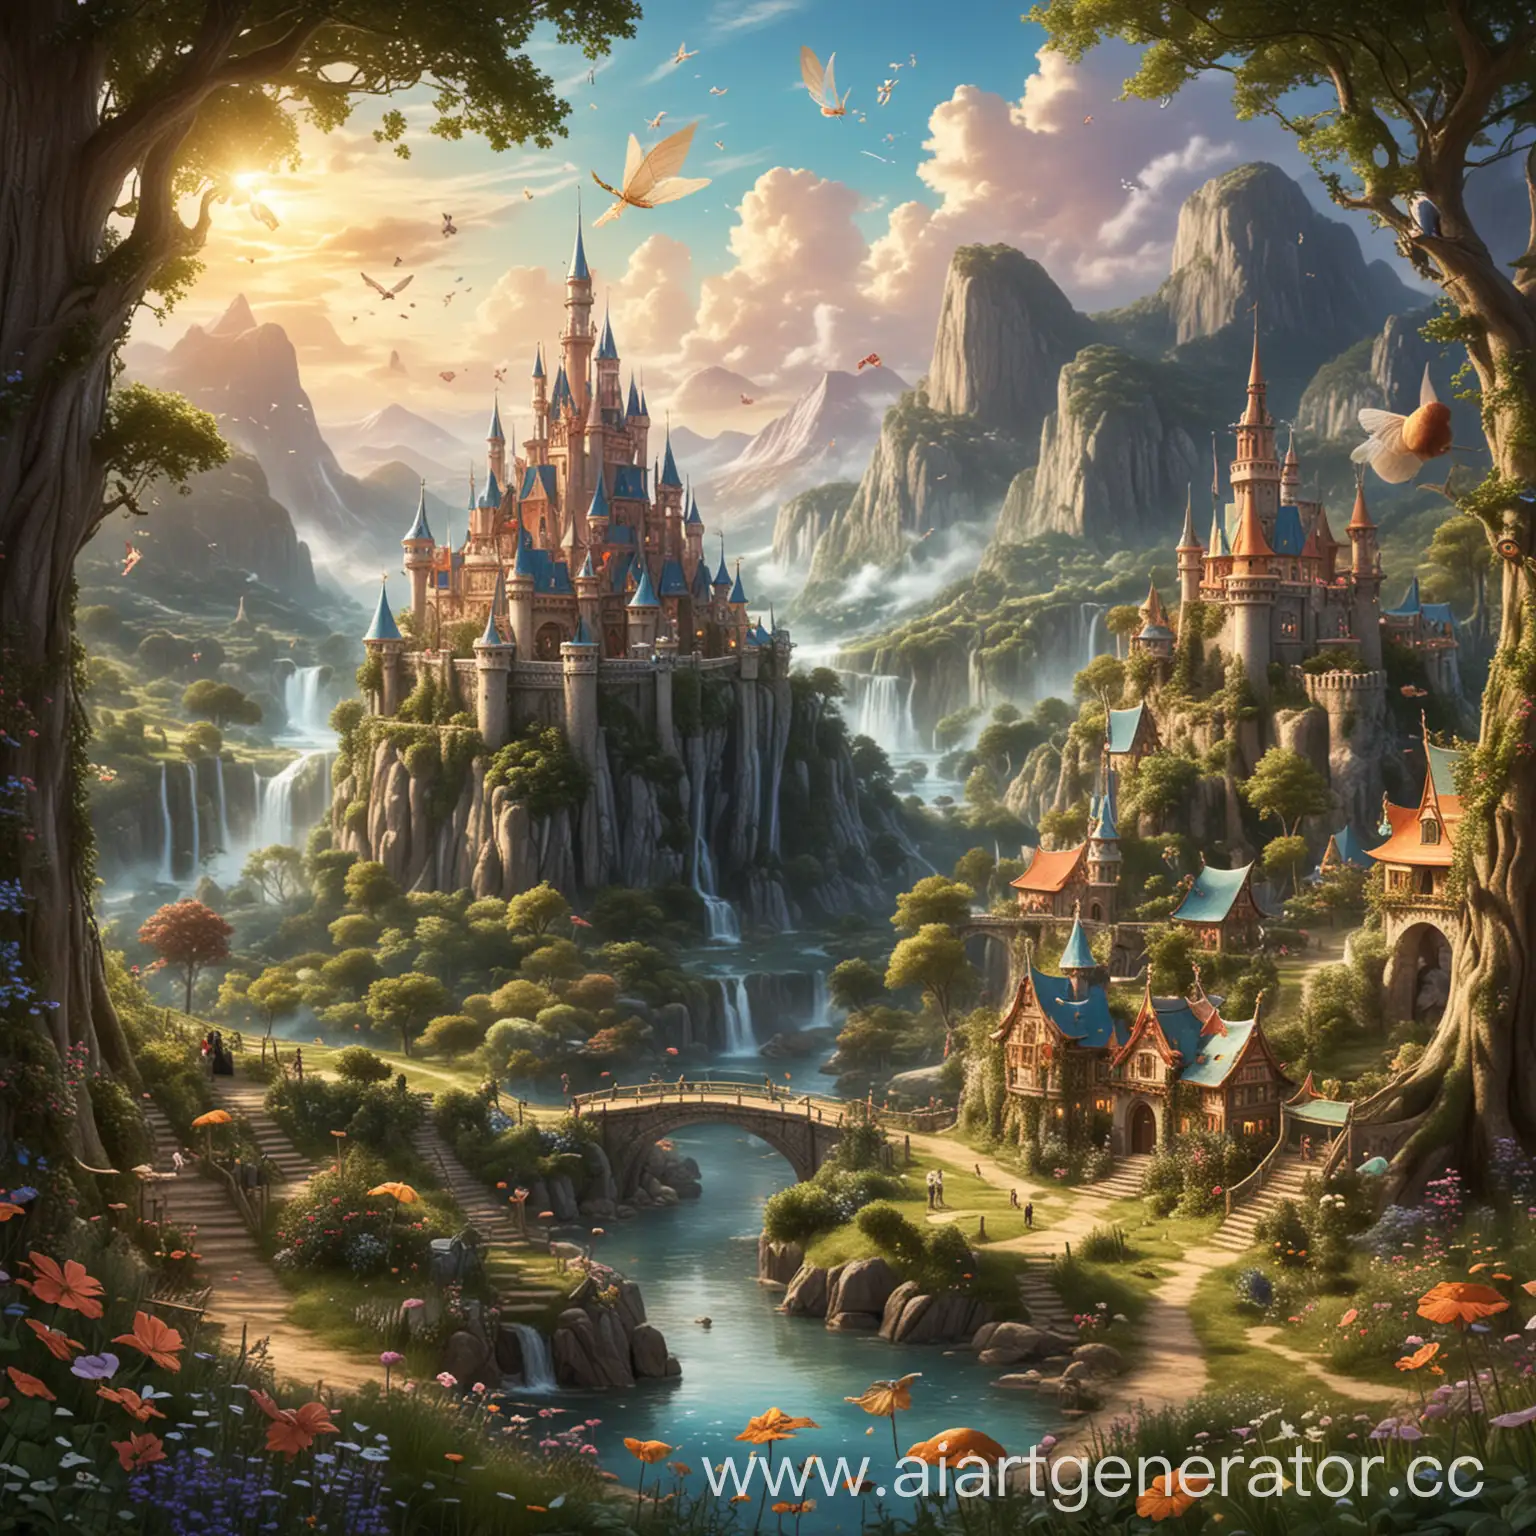 Enchanted-Kingdom-of-Fairies-Magical-Forest-Realm-with-Glowing-Flora-and-Mystical-Creatures